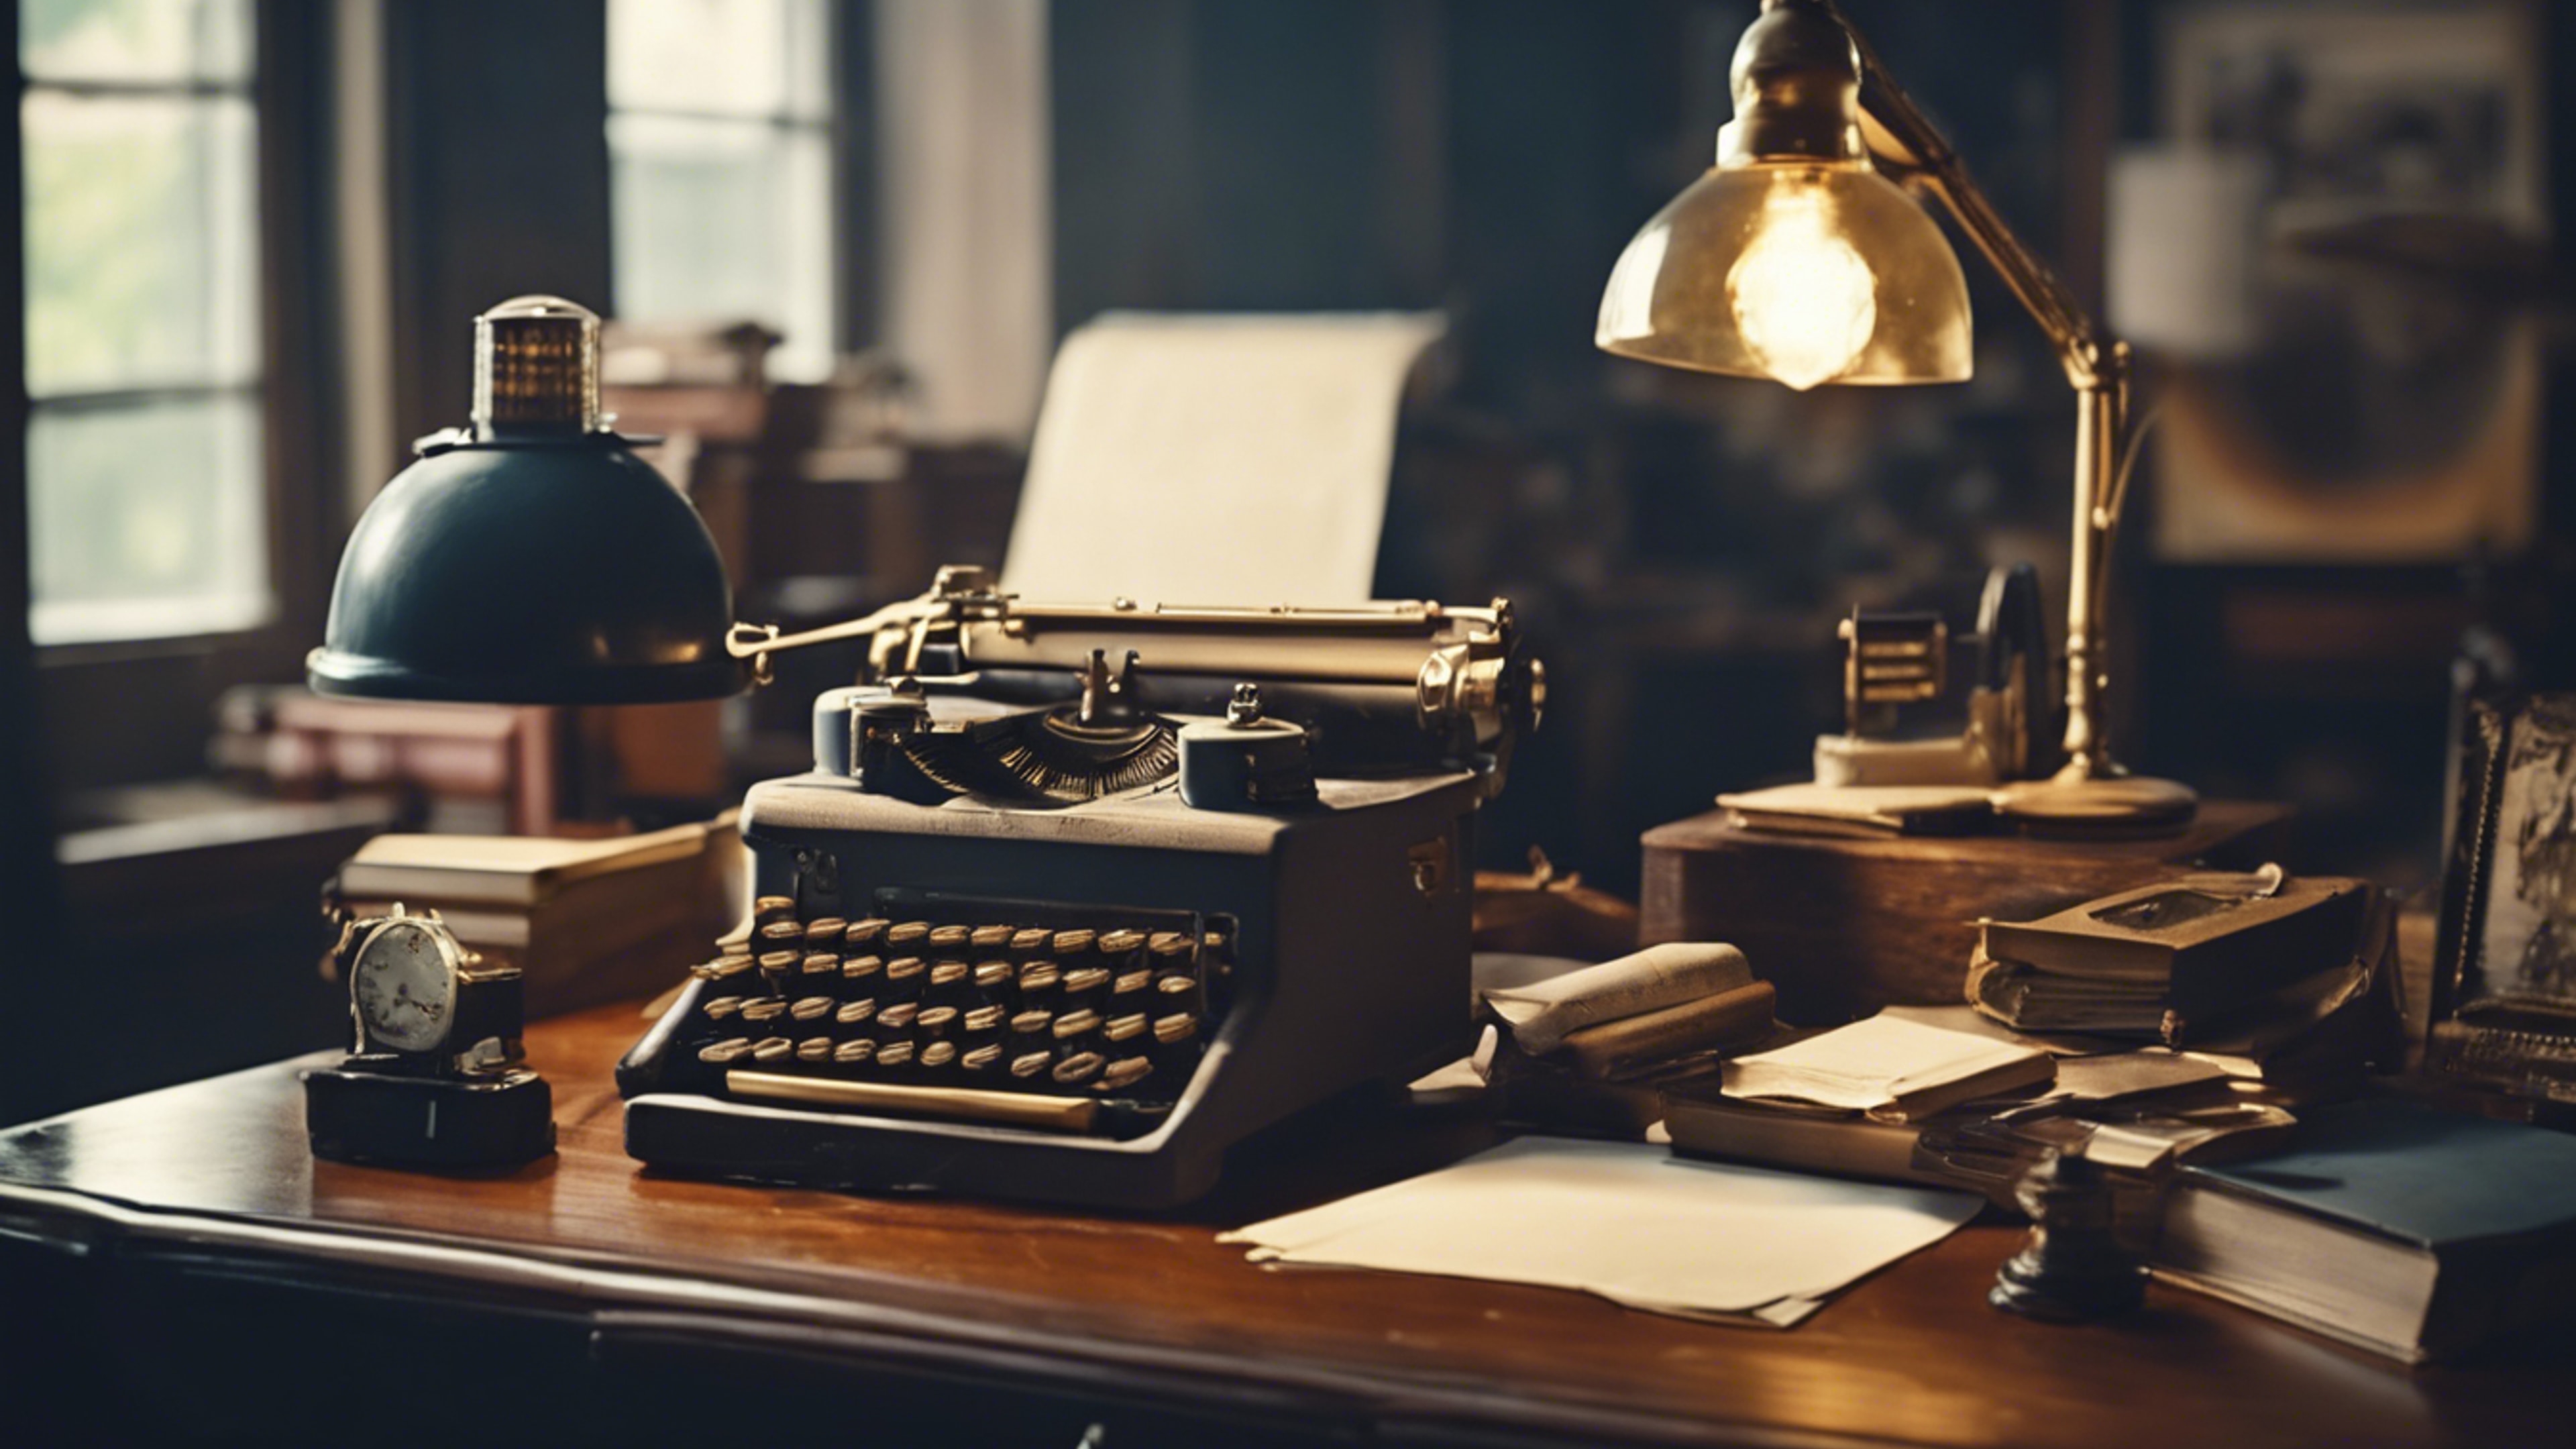 An old-fashioned navy office with a wooden desk, a typwriter and a vintage lamp. Wallpaper[8cb58867731e4823a50e]